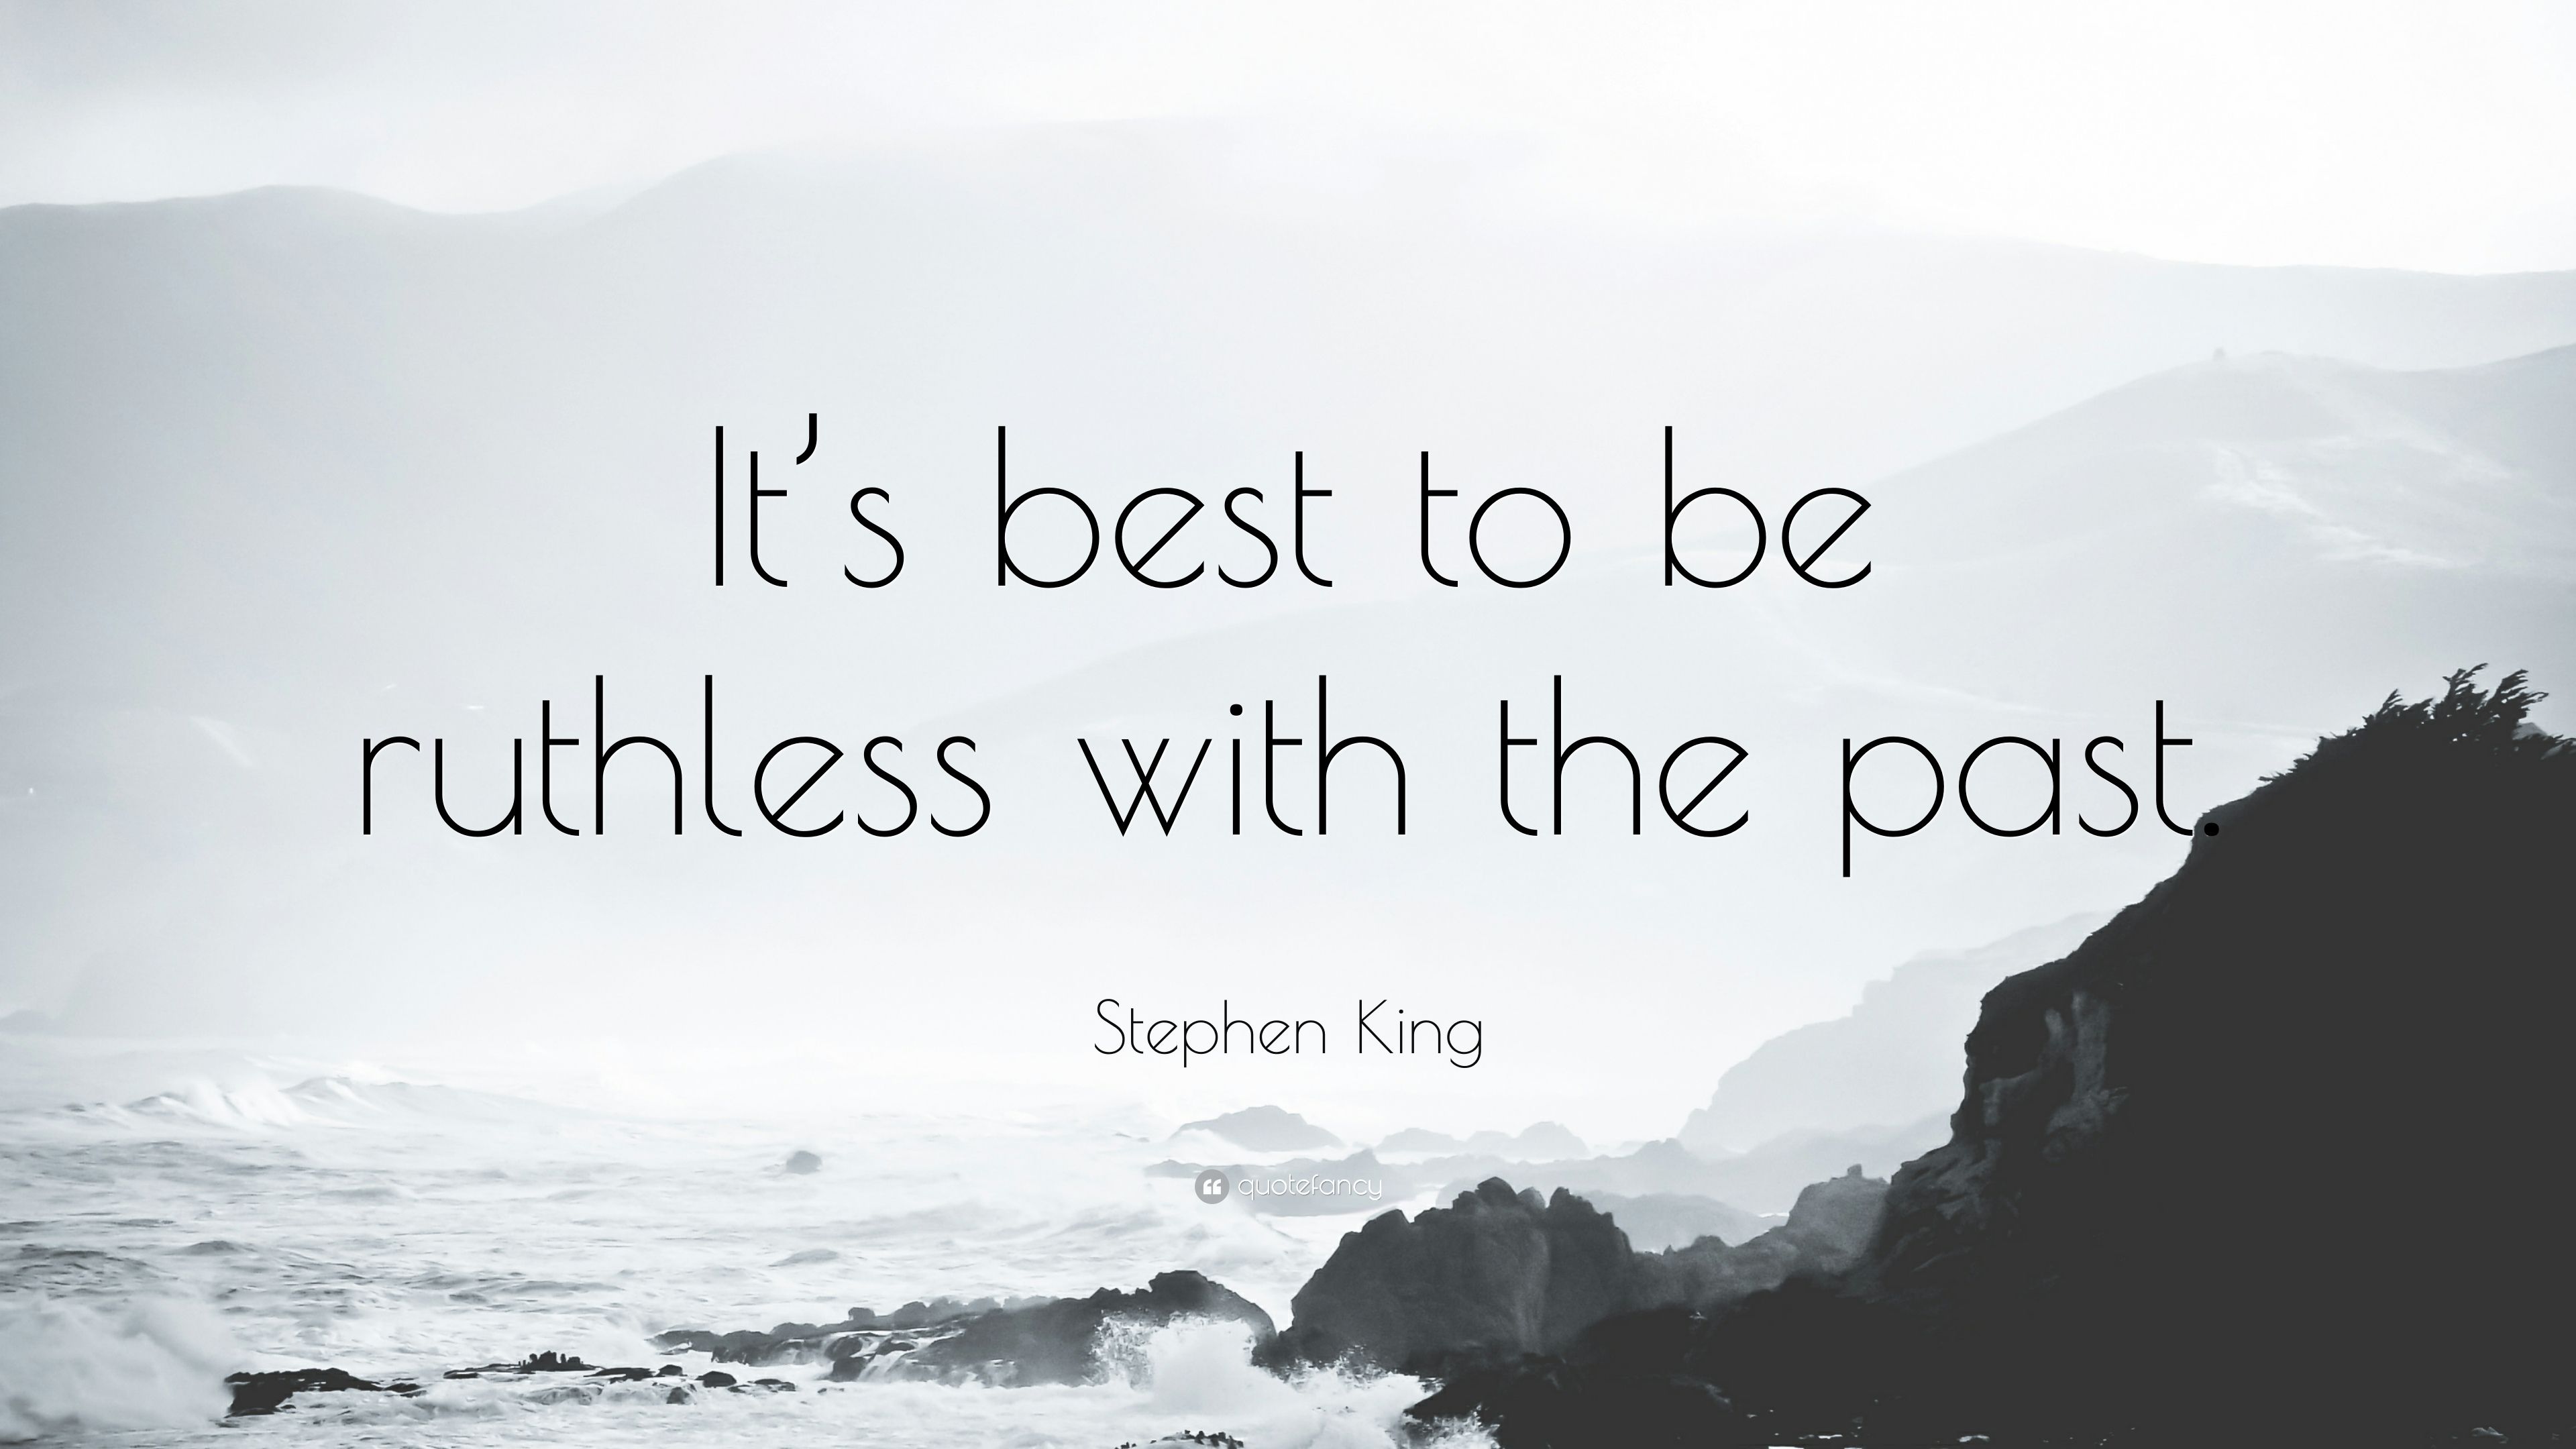 Stephen King Quote: “It's best to be ruthless with the past.” (12 wallpaper)